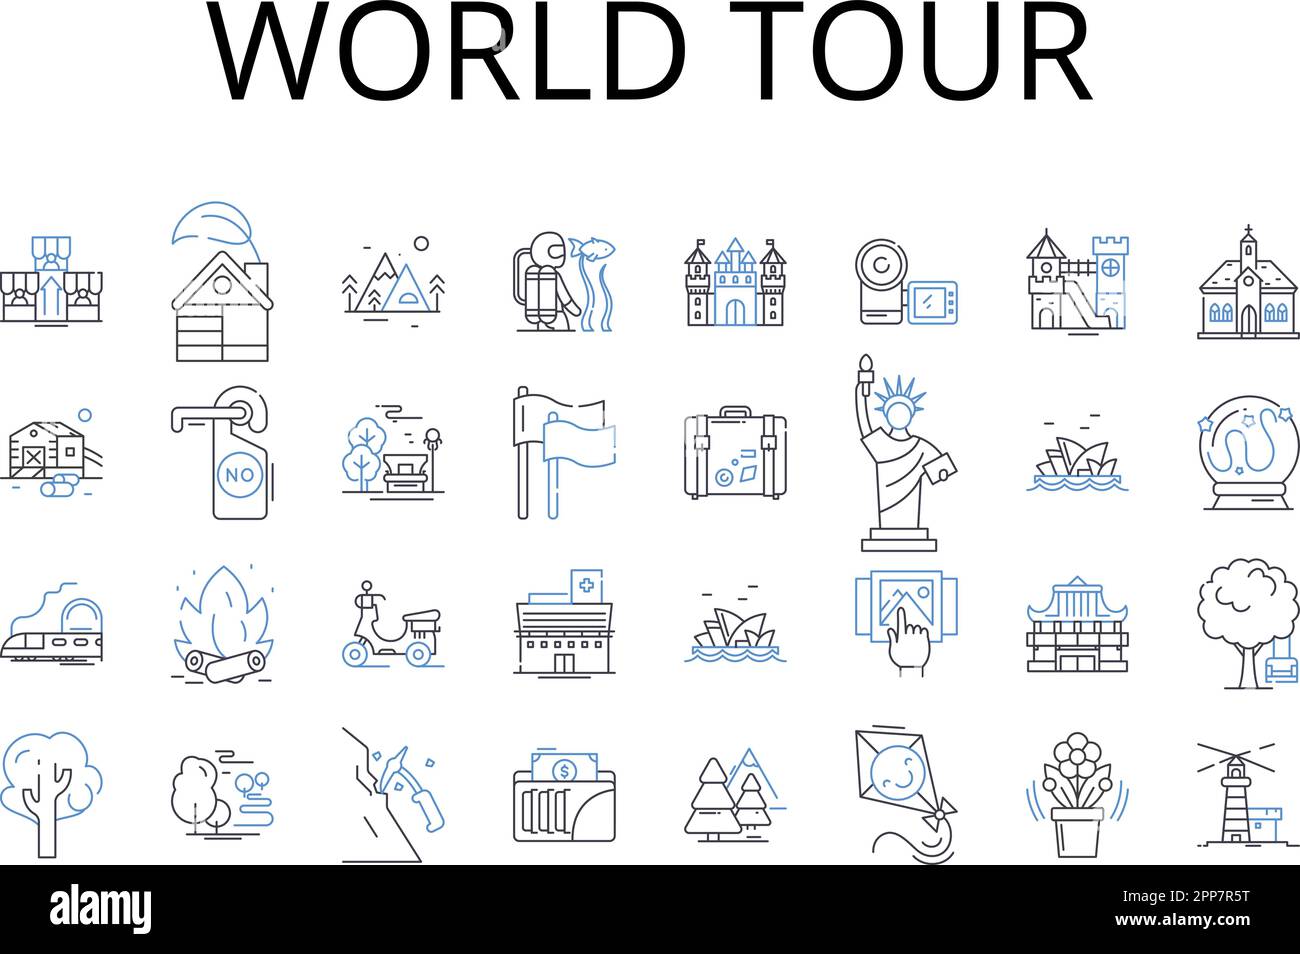 World tour line icons collection. Wild journey, Urban trek, High adventure, Daring odyssey, Global voyage, Continental hop, Cultural roam vector and Stock Vector